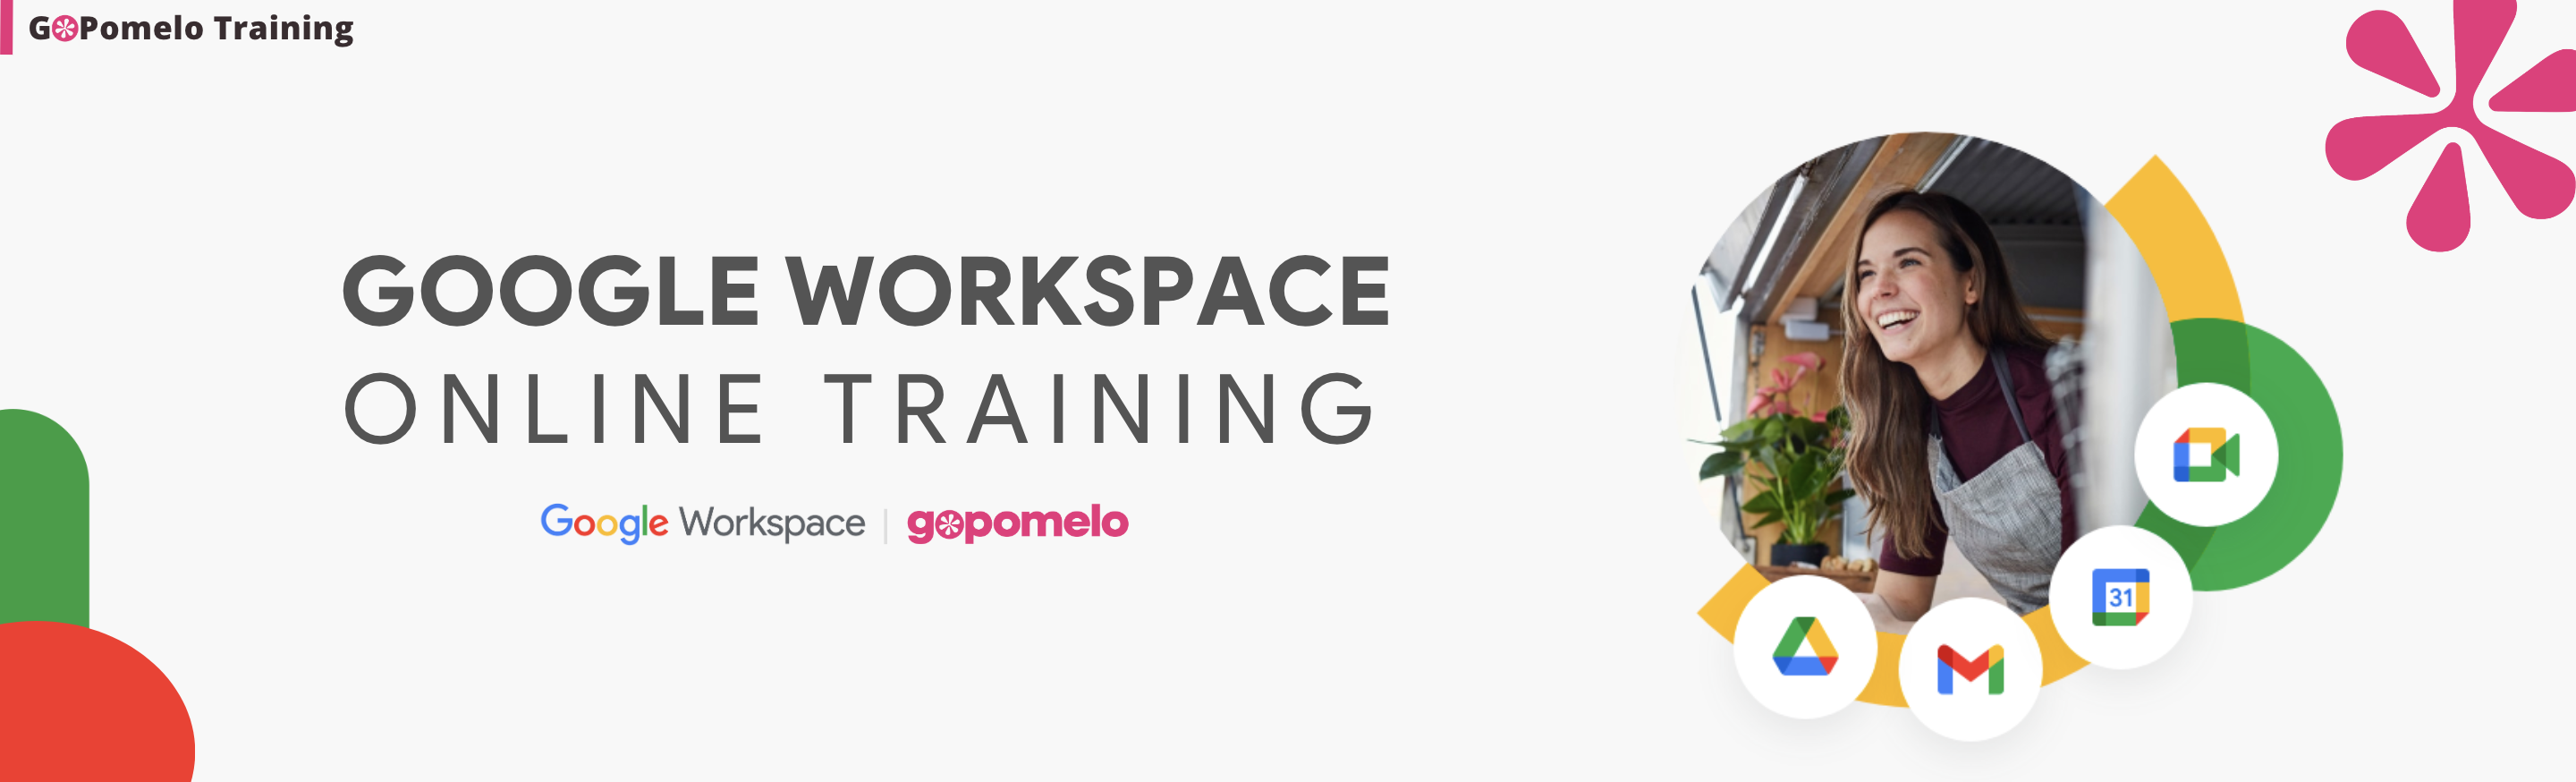 Google Workspace Training by GoPomelo